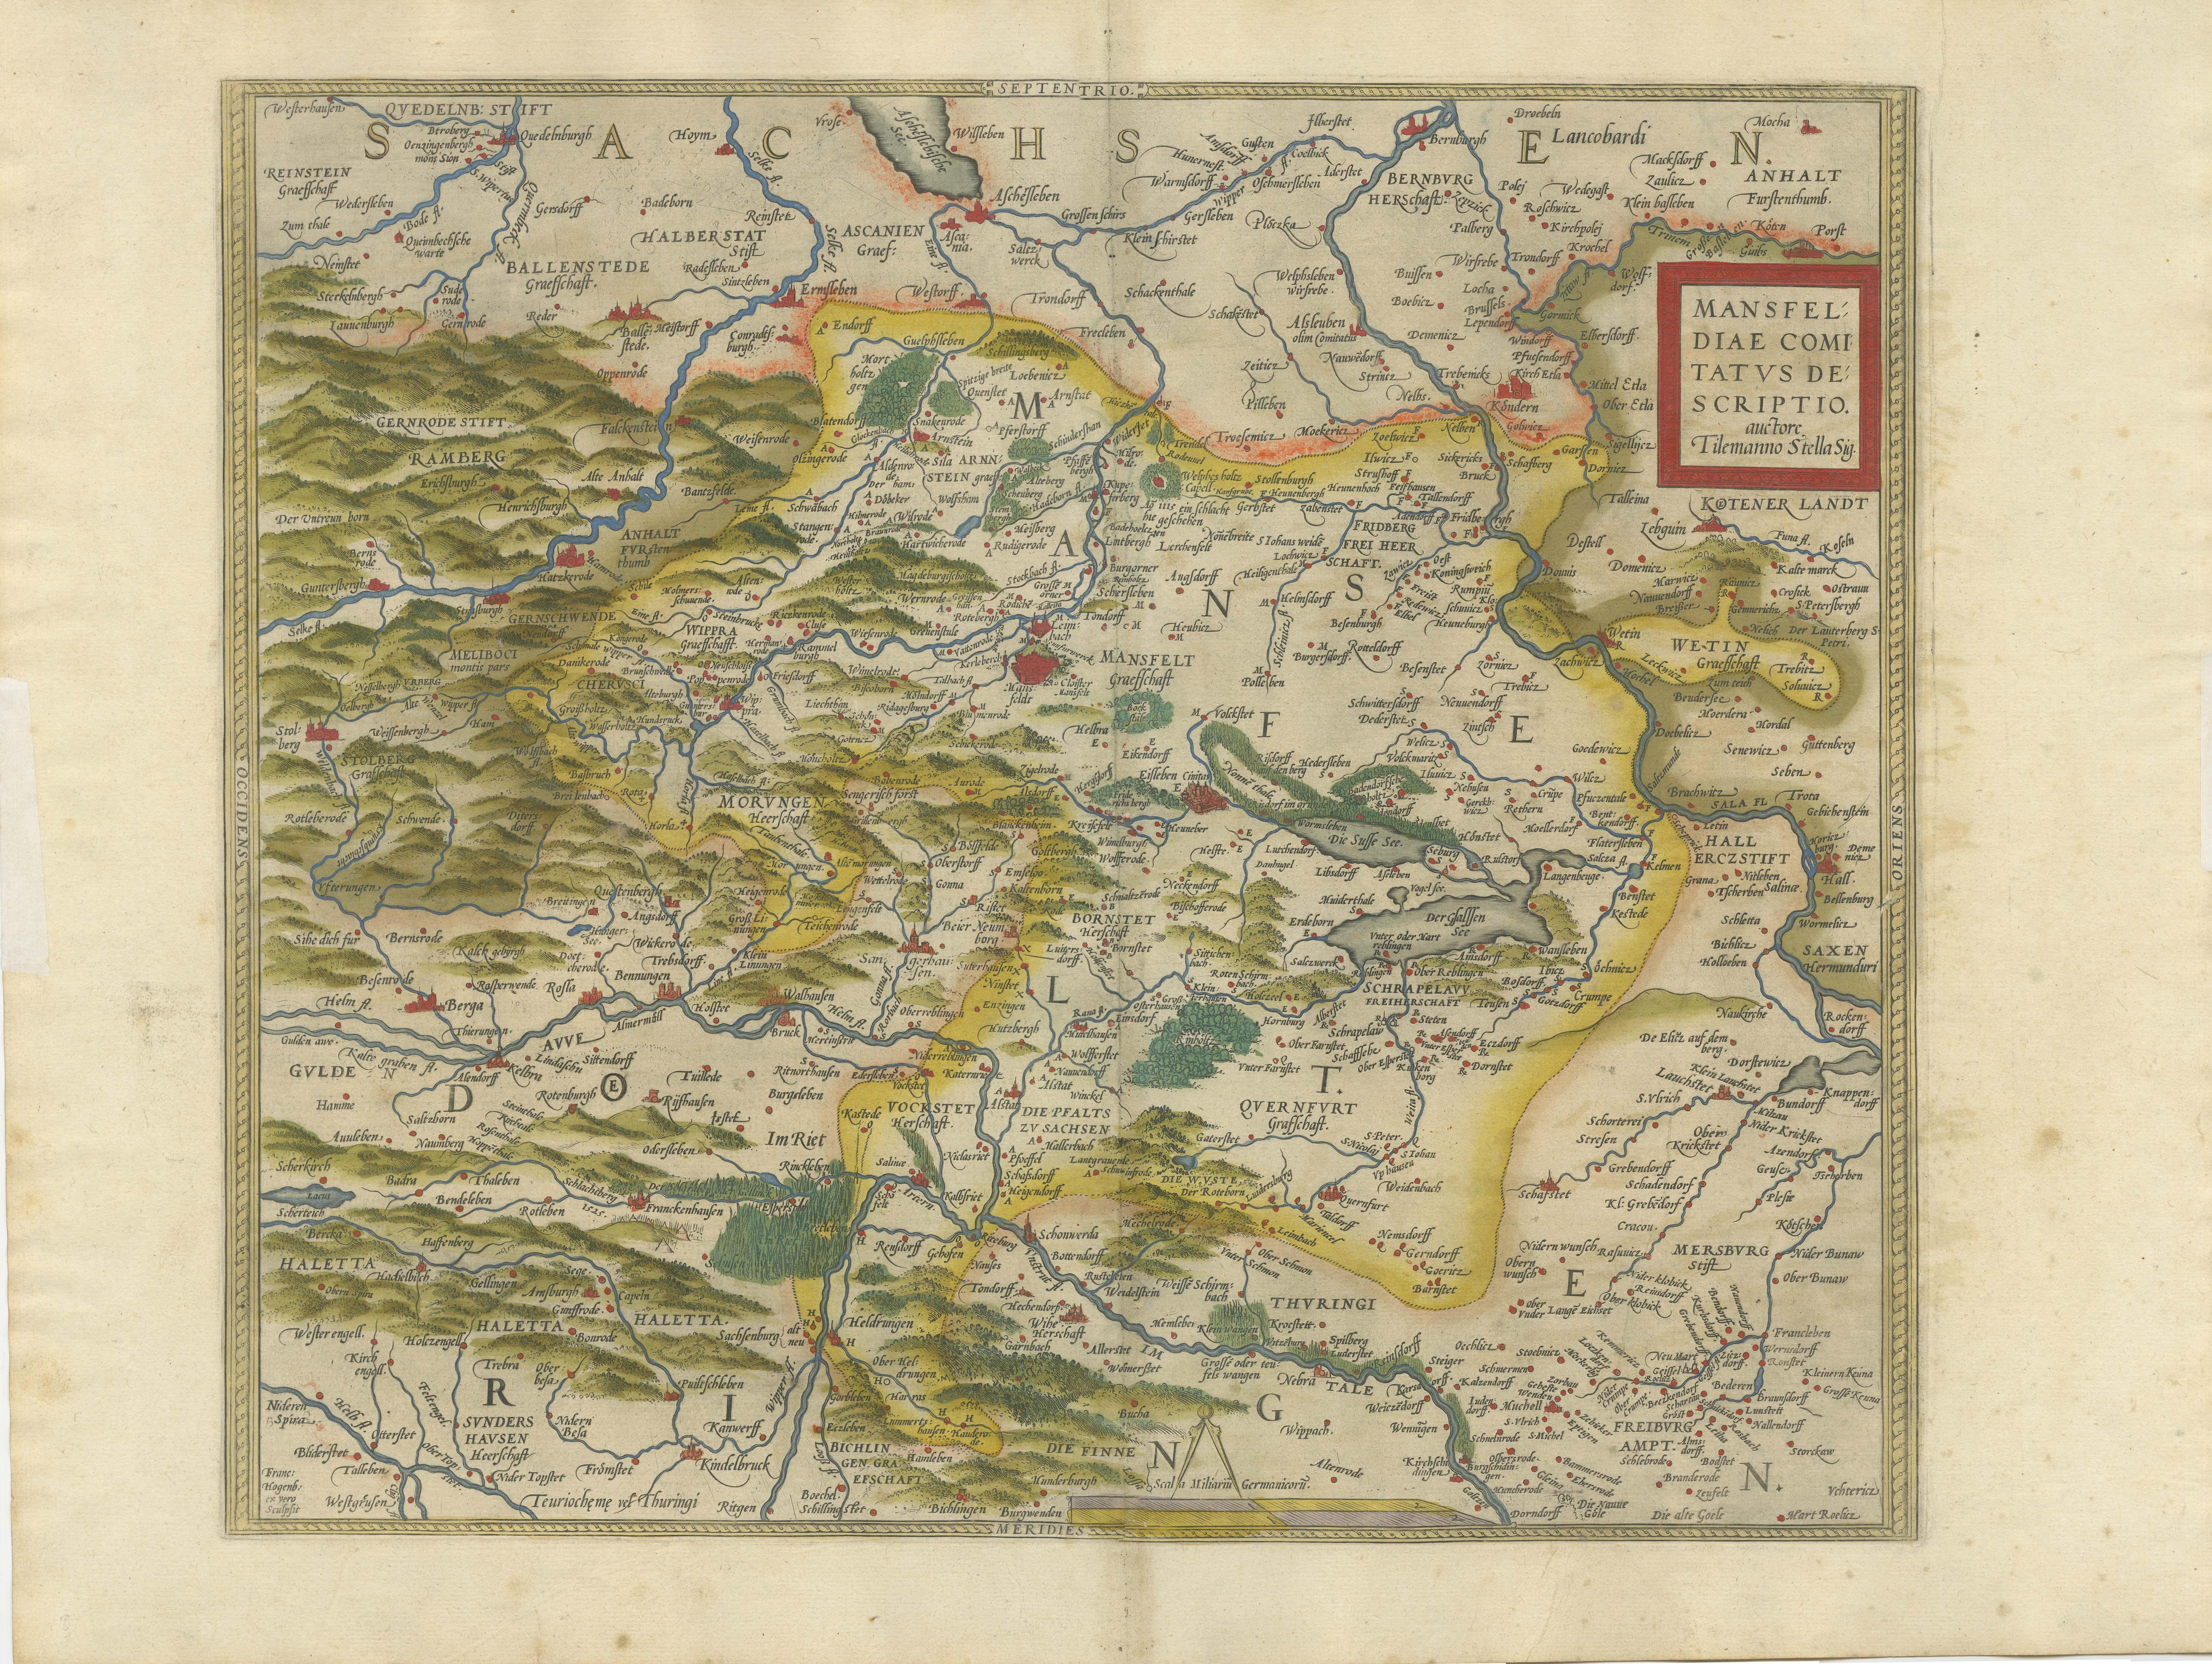 Antique map titled 'Mansfeldiae Comitatus Descriptio'. Original antique map of the region of Mansfeld, Saxony-Anhalt, Germany. Shows the area between Halle a. d. Saale, Aschersleben, Walkenried and Heldrungen with Mansfeld in the centre. From the